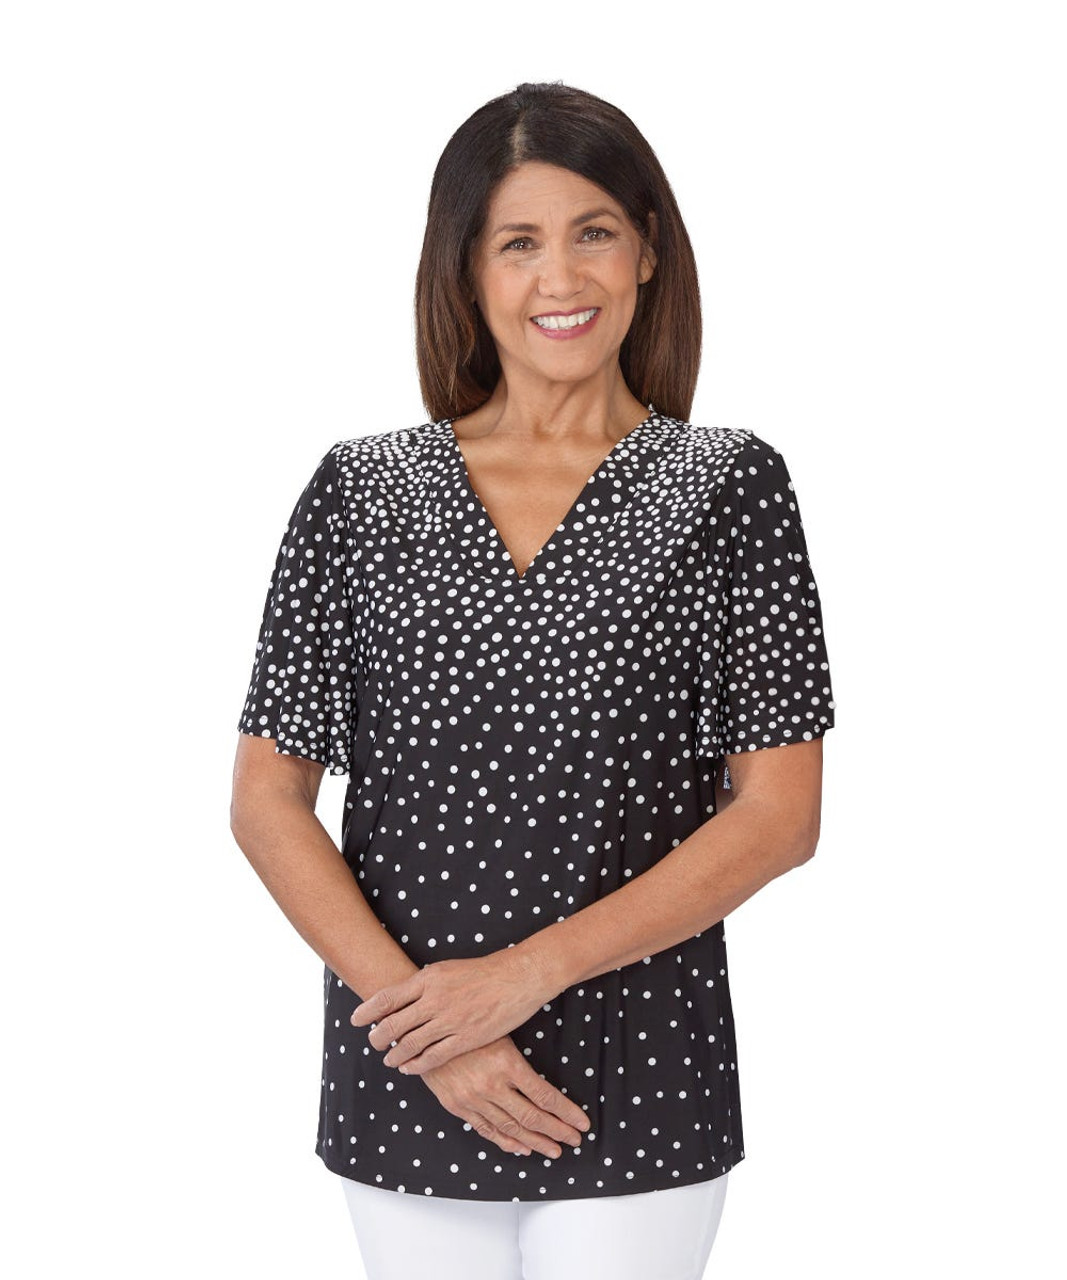 Silverts SV41080 Wide Bell Sleeve Top For Easy Self Dressing White Dots, Size=XL, SV41080-SV1284-XL